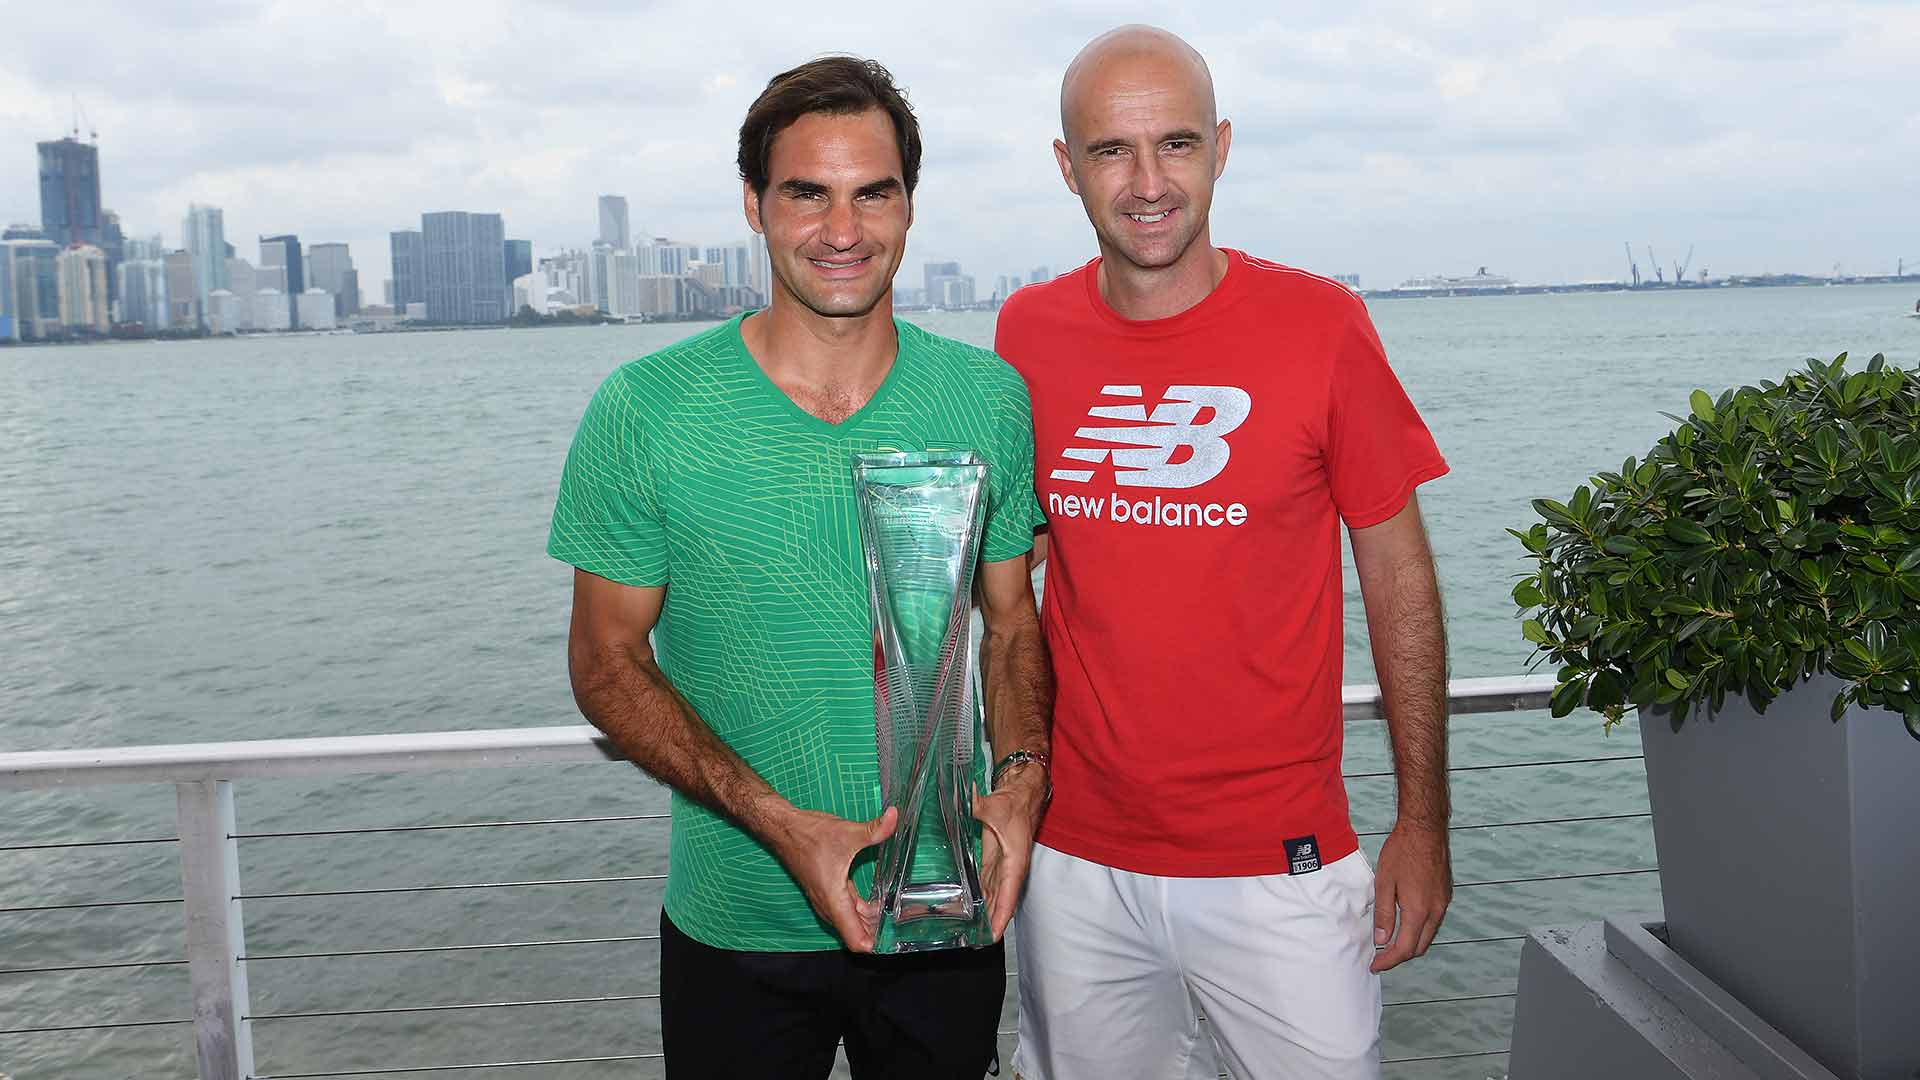 Roger Federer celebrates his third Miami Open title with coach Ivan Ljubicic, whom he defeated in the Miami title match in 2006.